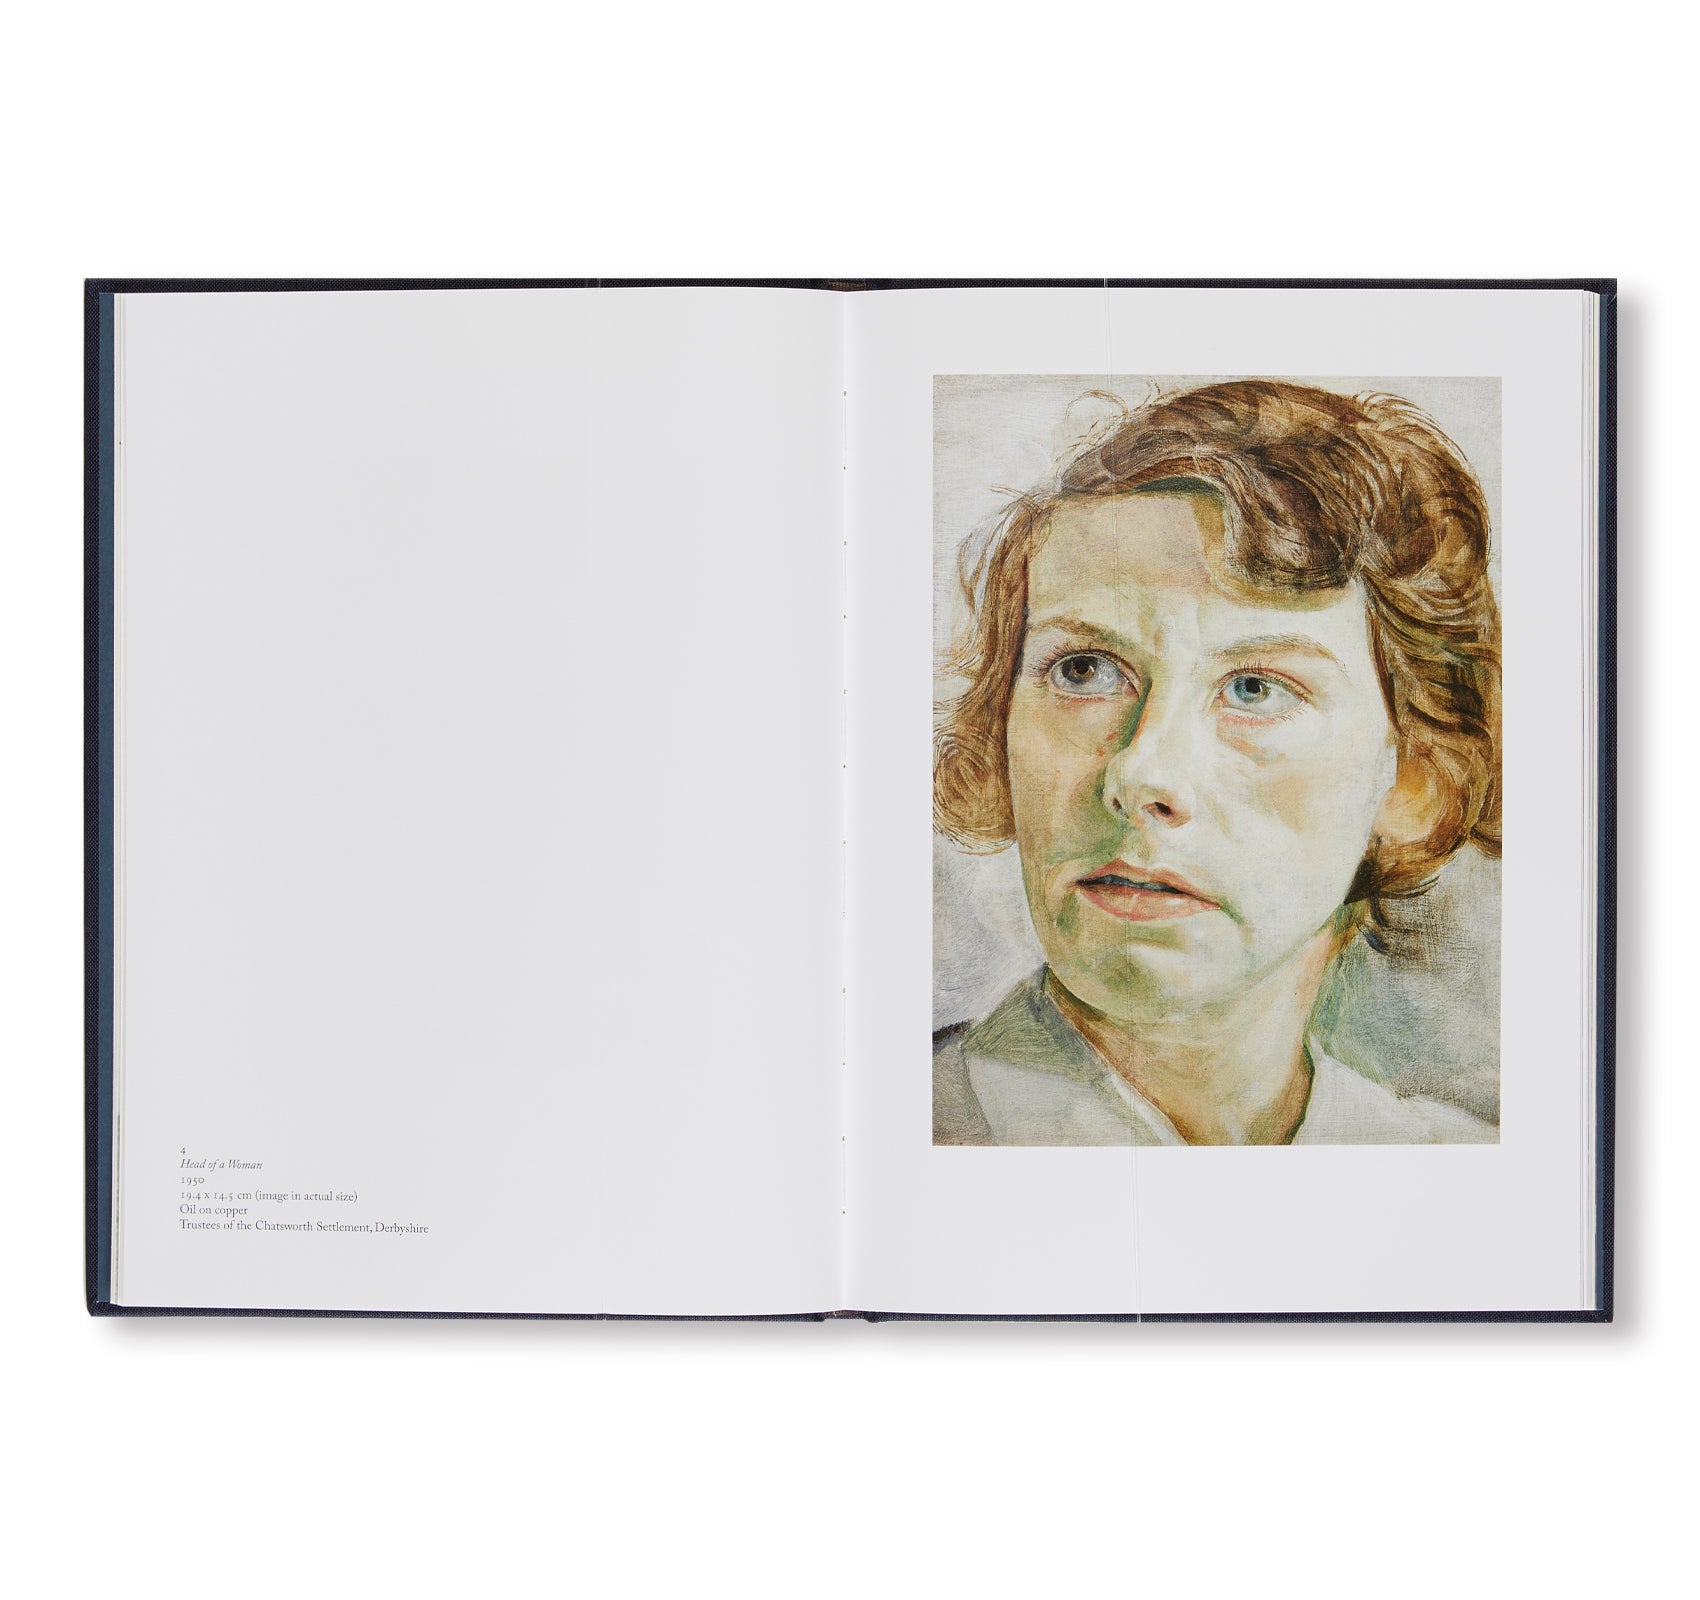 THE COPPER PAINTINGS by Lucian Freud